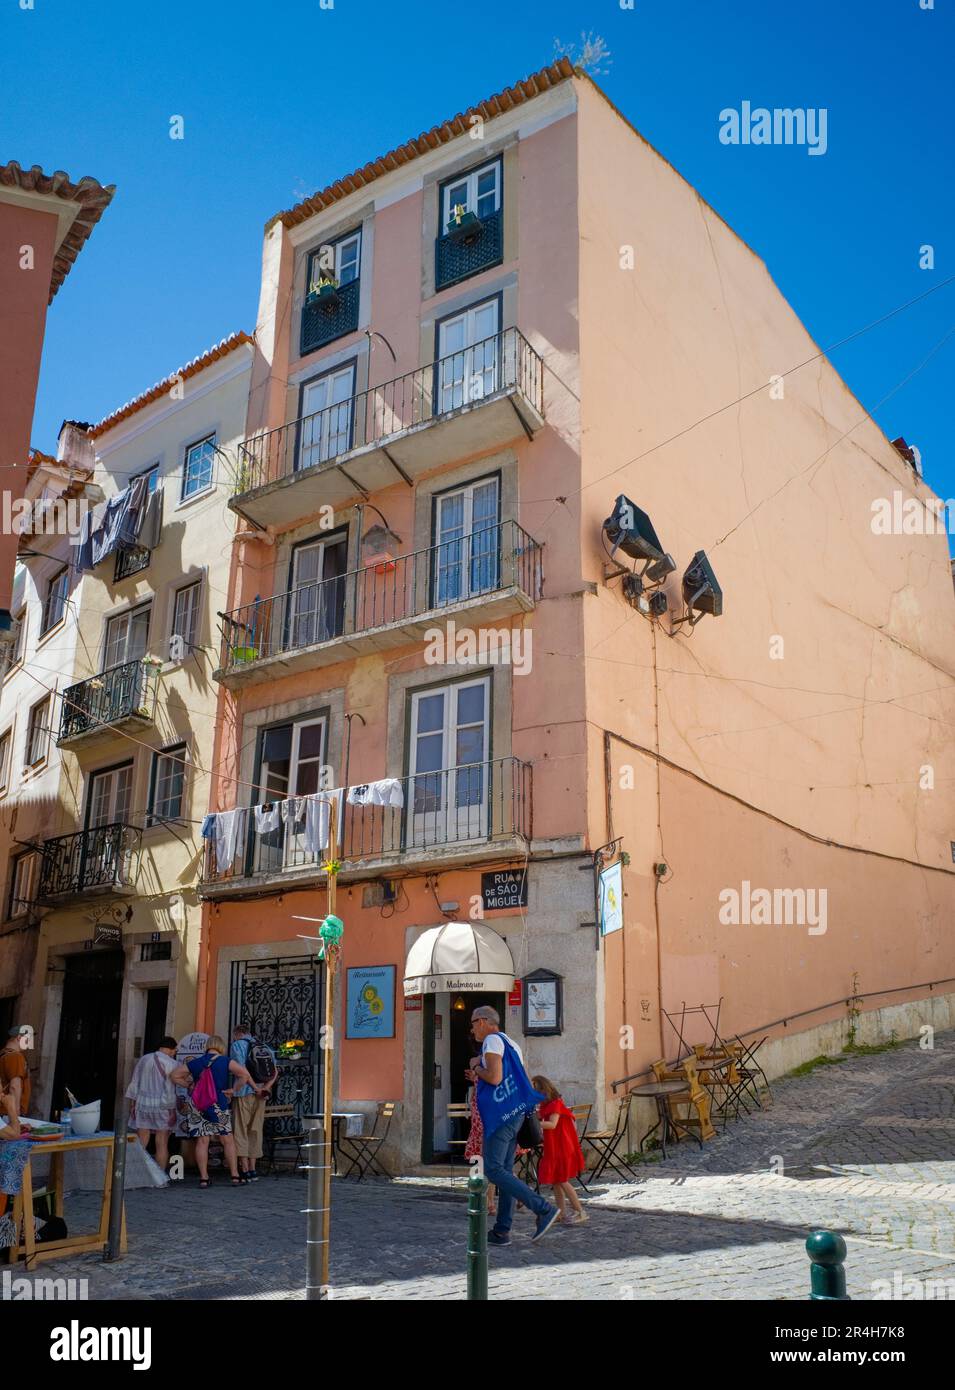 Tall buildings in the Alfama district of Lisbon where old and new meet Stock Photo